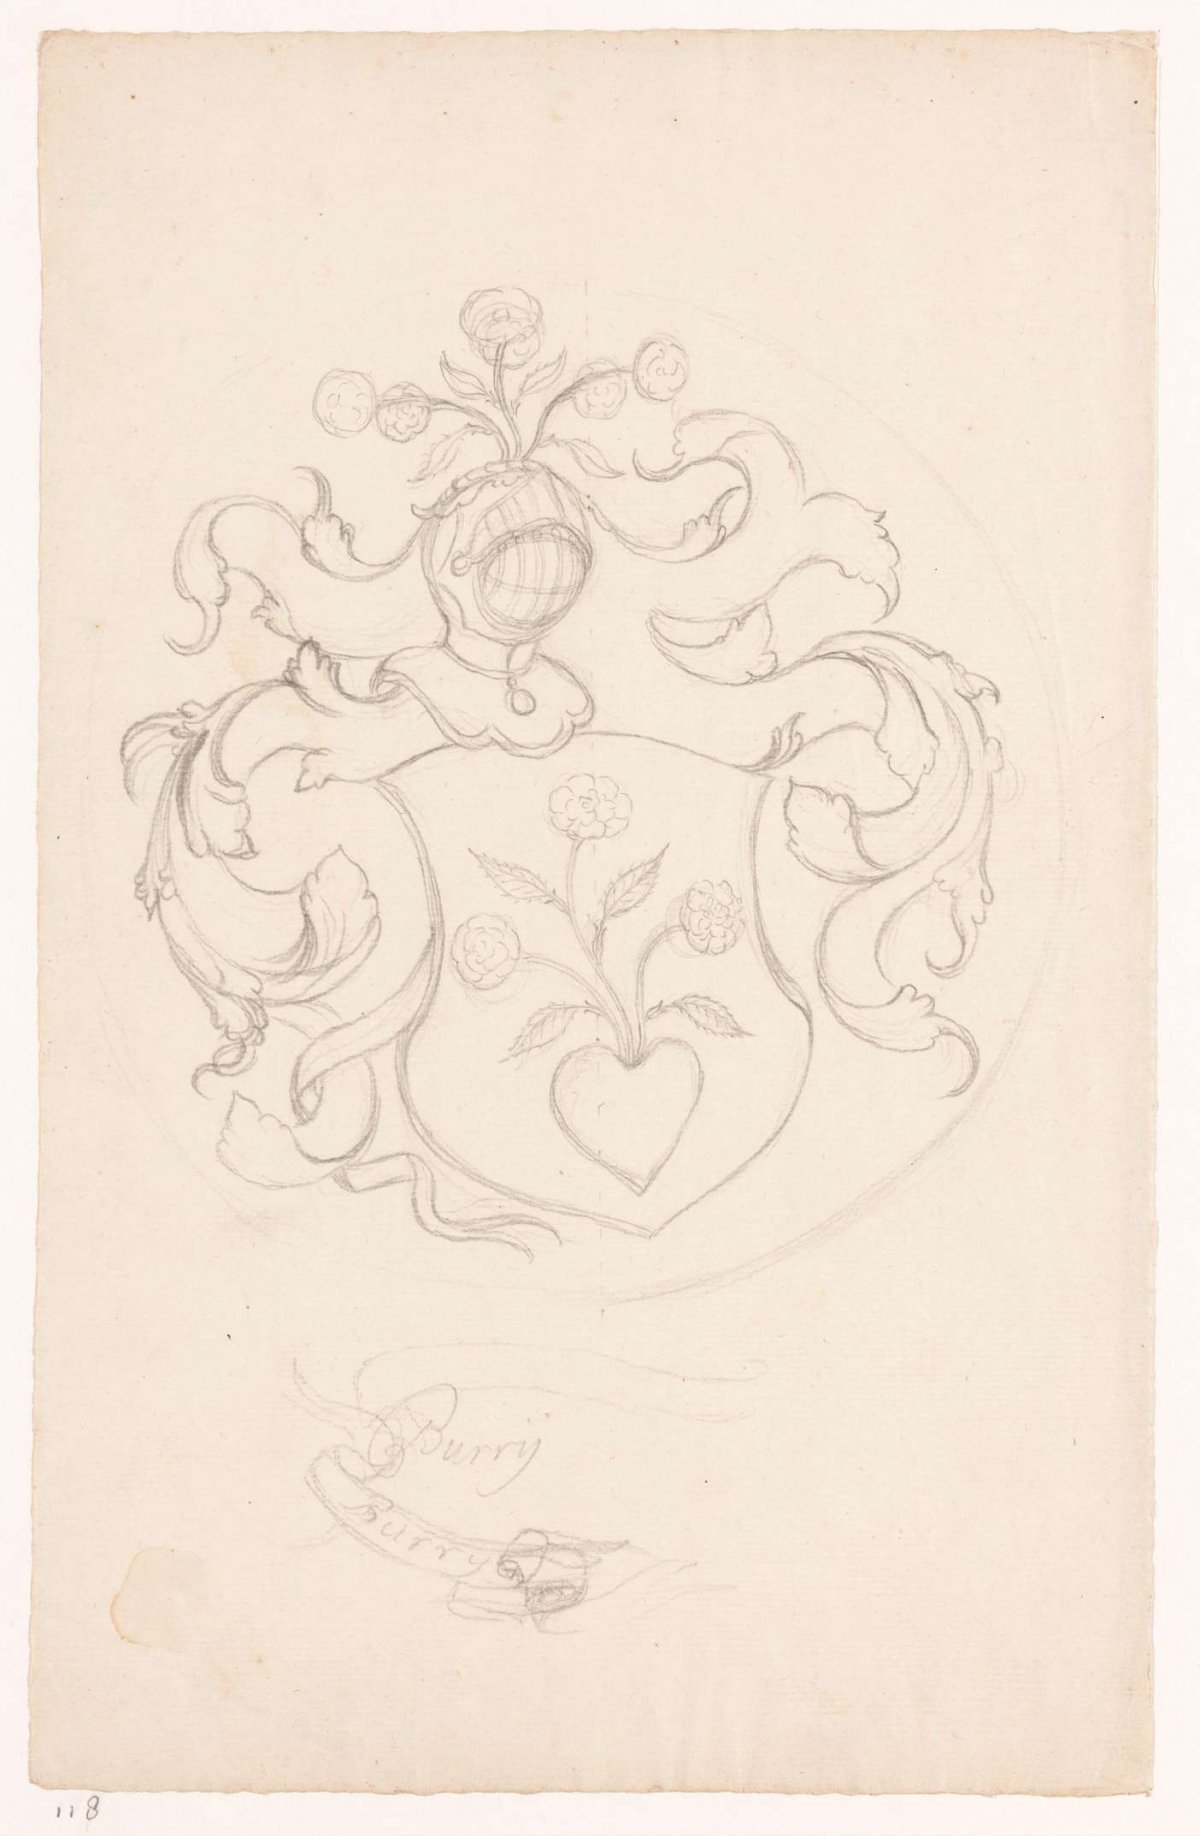 Family crest with rose, Jan Brandes, 1770 - 1808